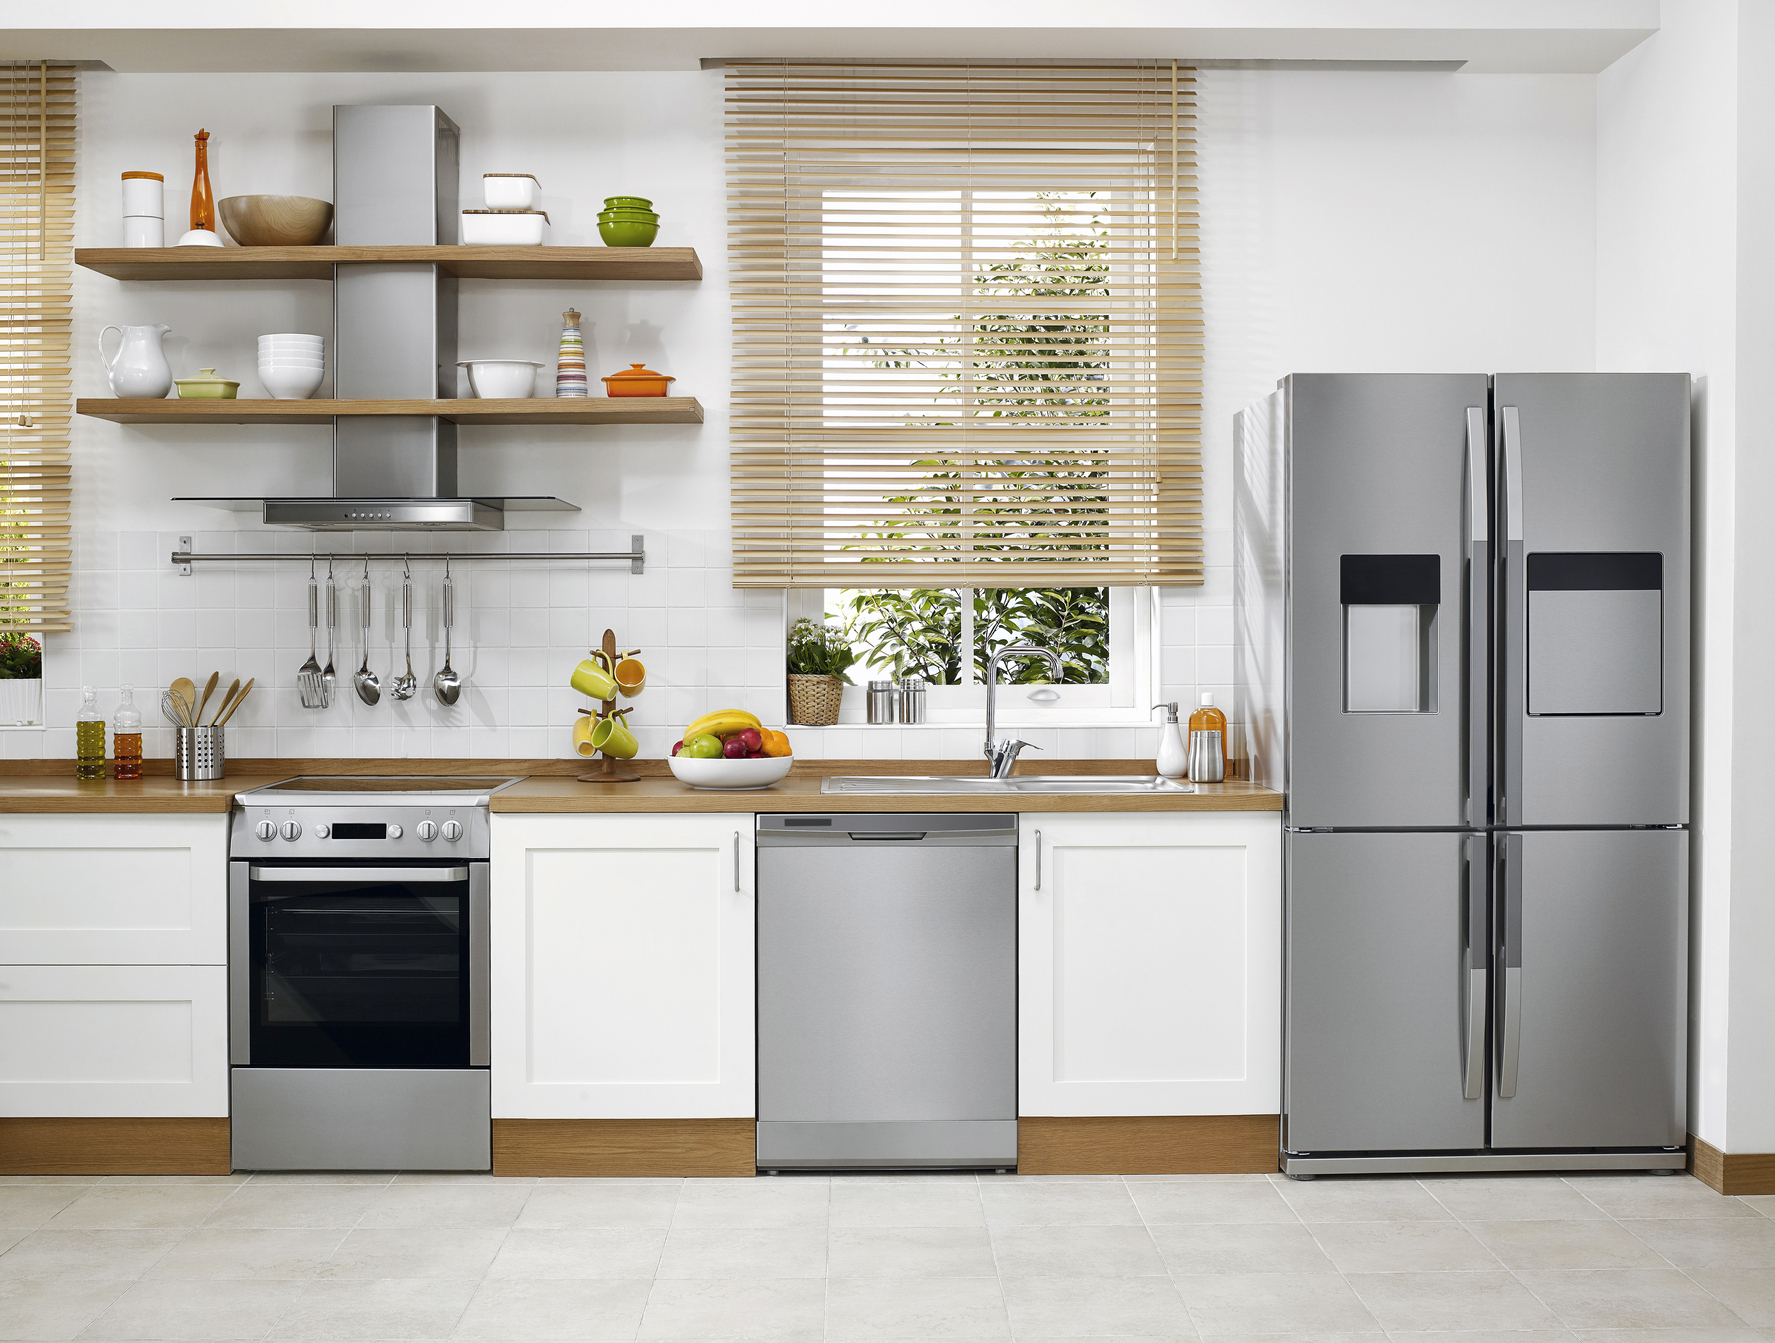 A picture of a traditional kitchen with stainless steel appliances